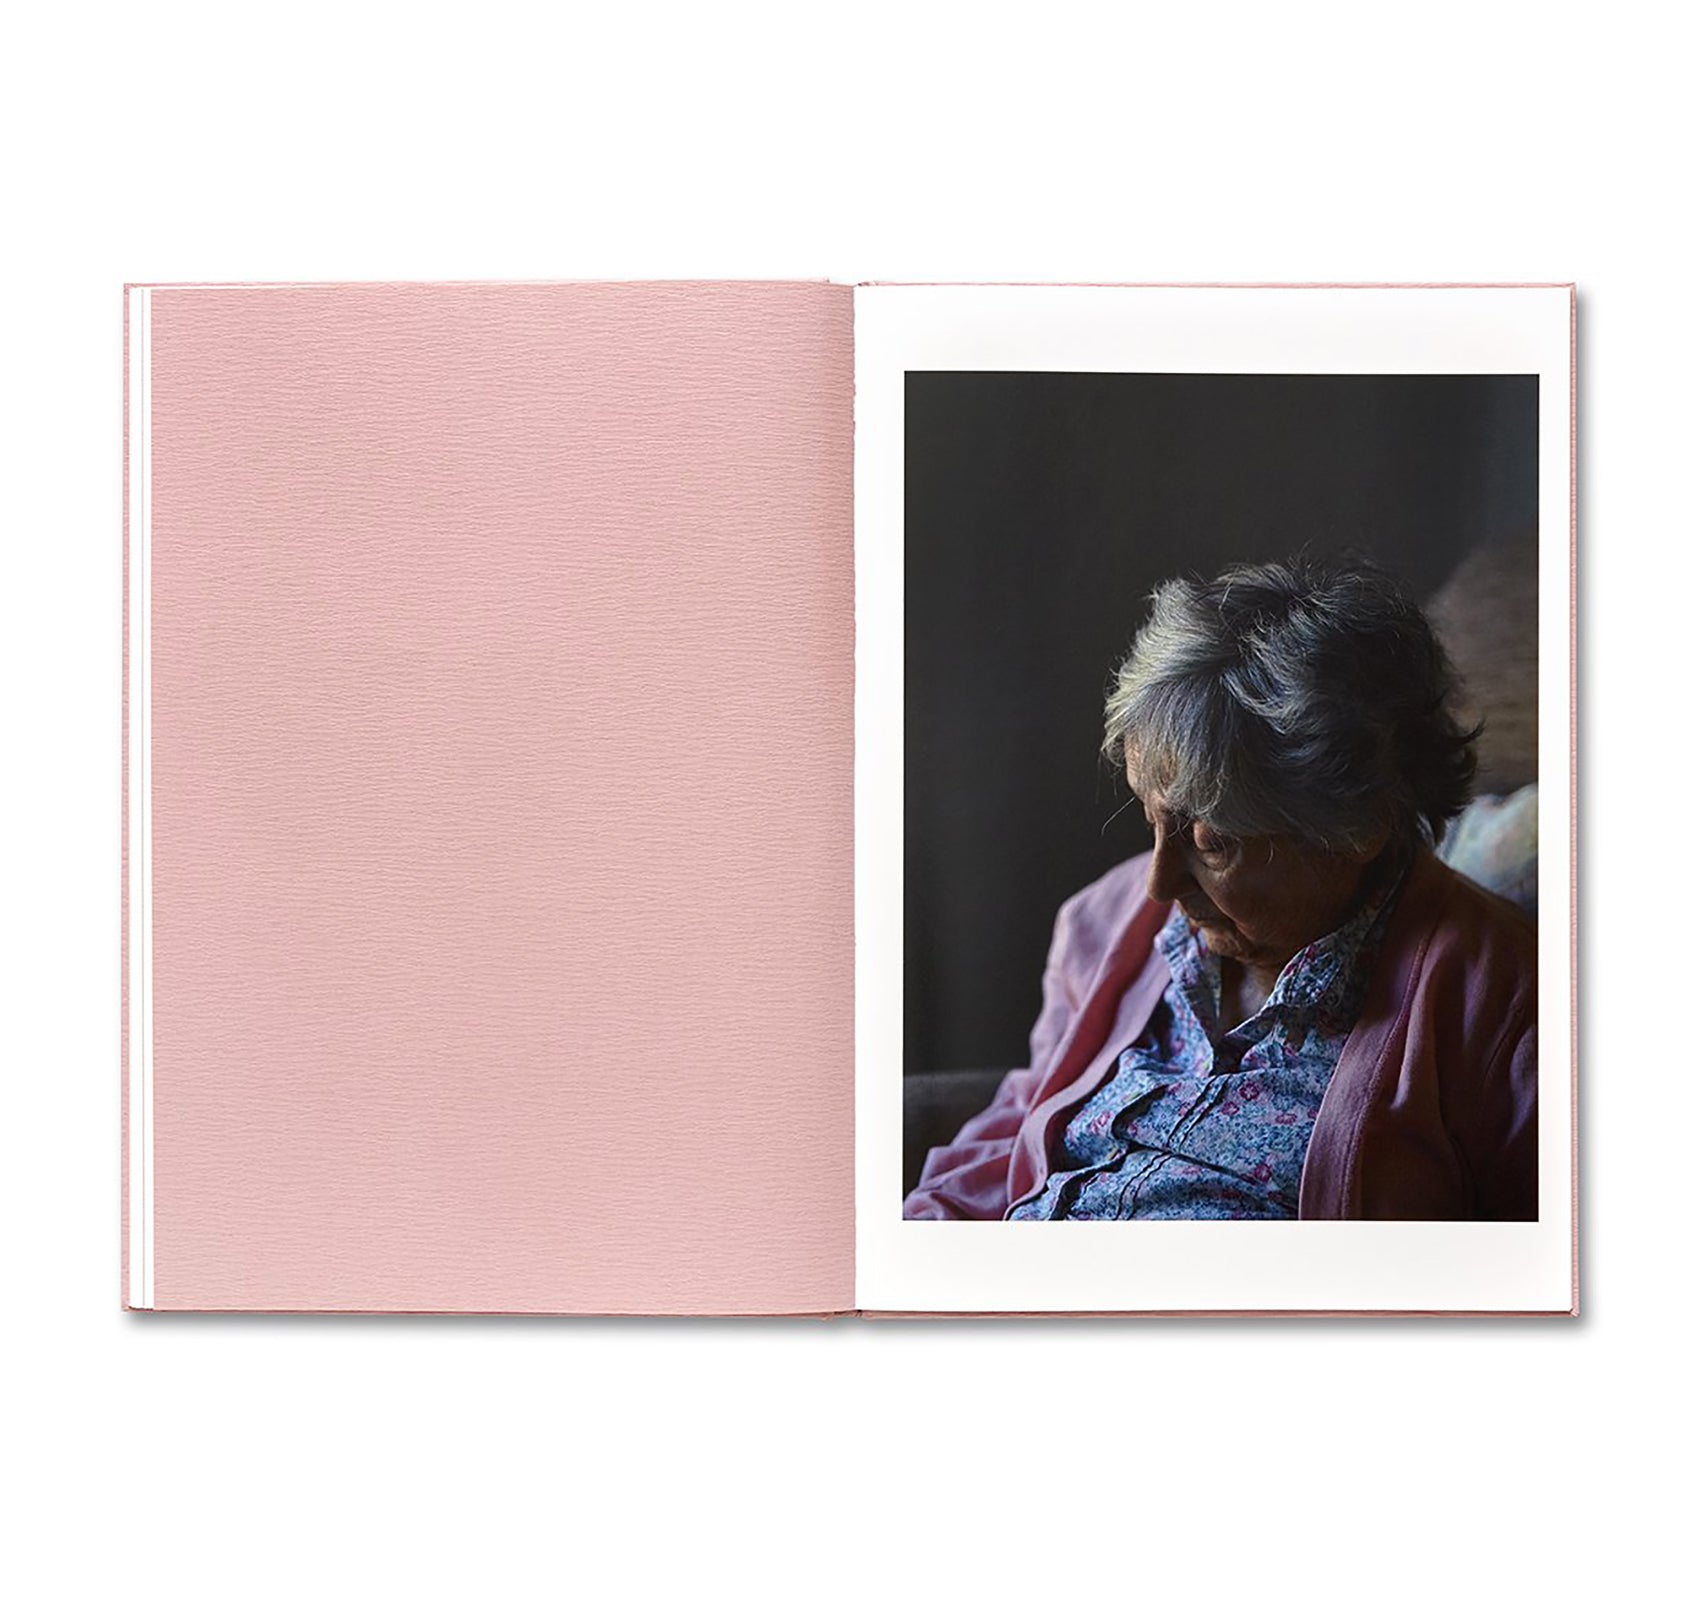 MOTHER by Paul Graham [SIGNED]